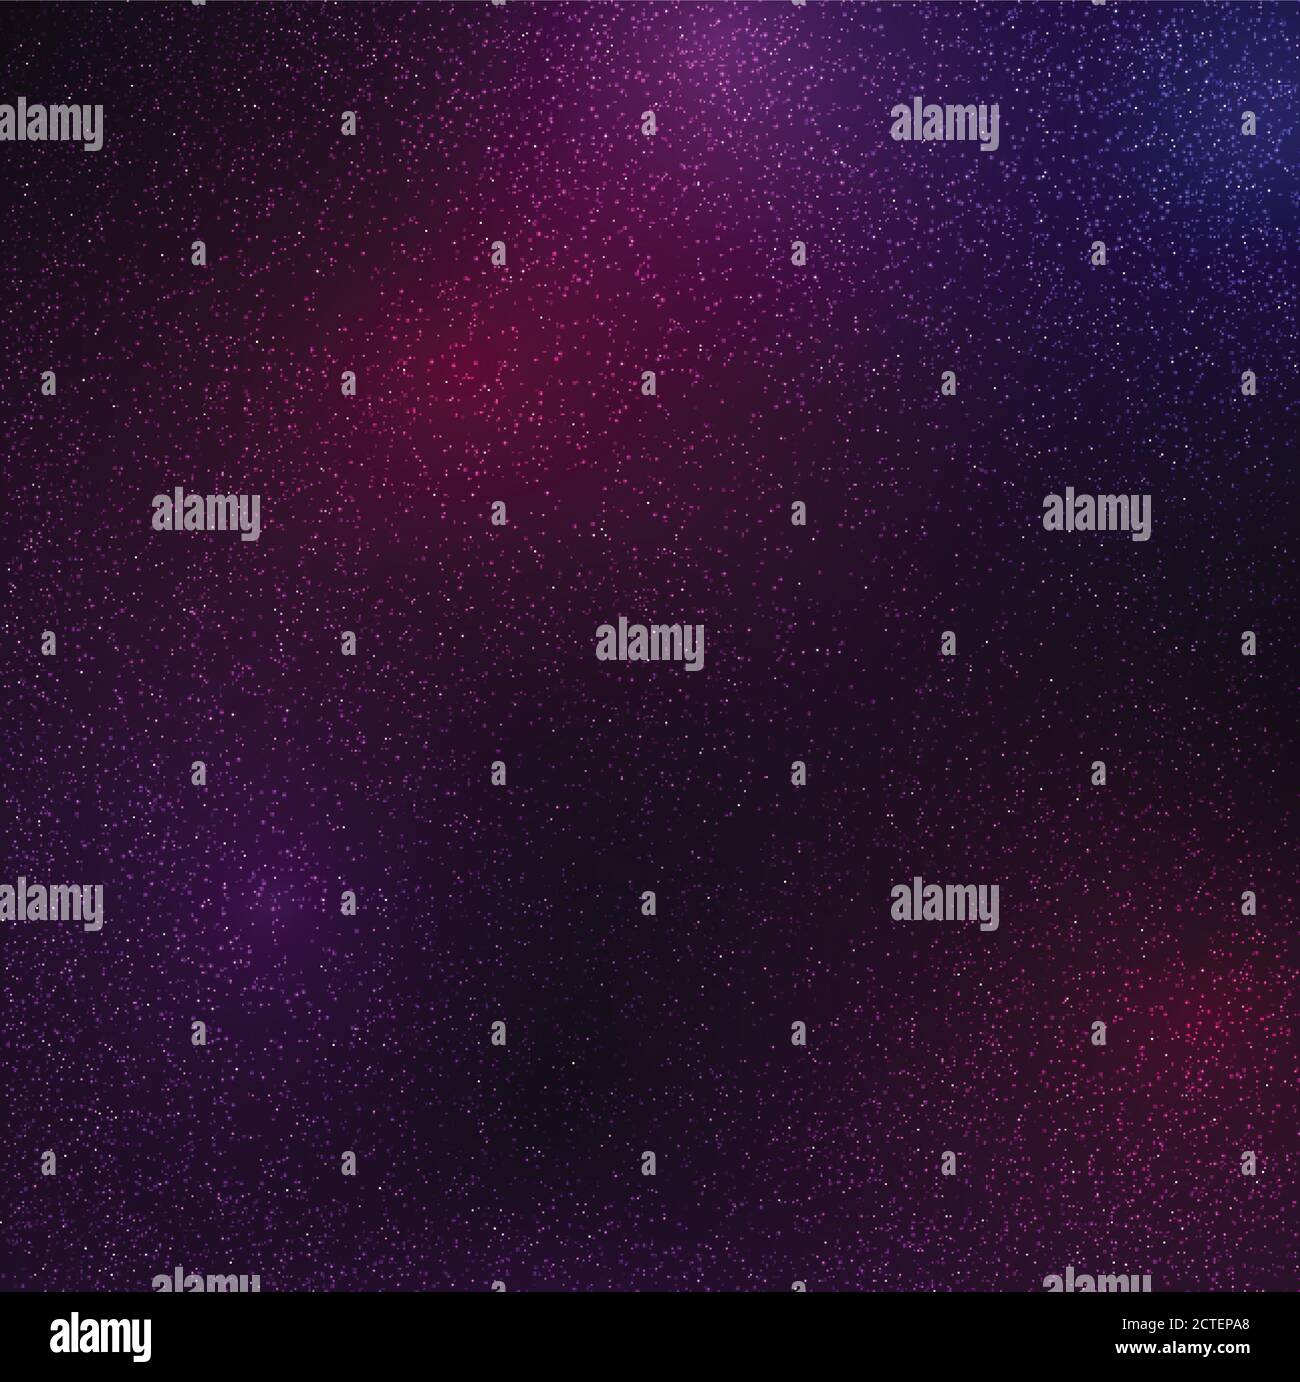 Free download Cute Galaxy Backgrounds Affected galaxy background by  [800x1500] for your Desktop, Mobile & Tablet | Explore 48+ Tumblr Galaxy  Wallpaper | Wallpapers Tumblr, Wallpaper Tumblr, Galaxy Tumblr Wallpaper